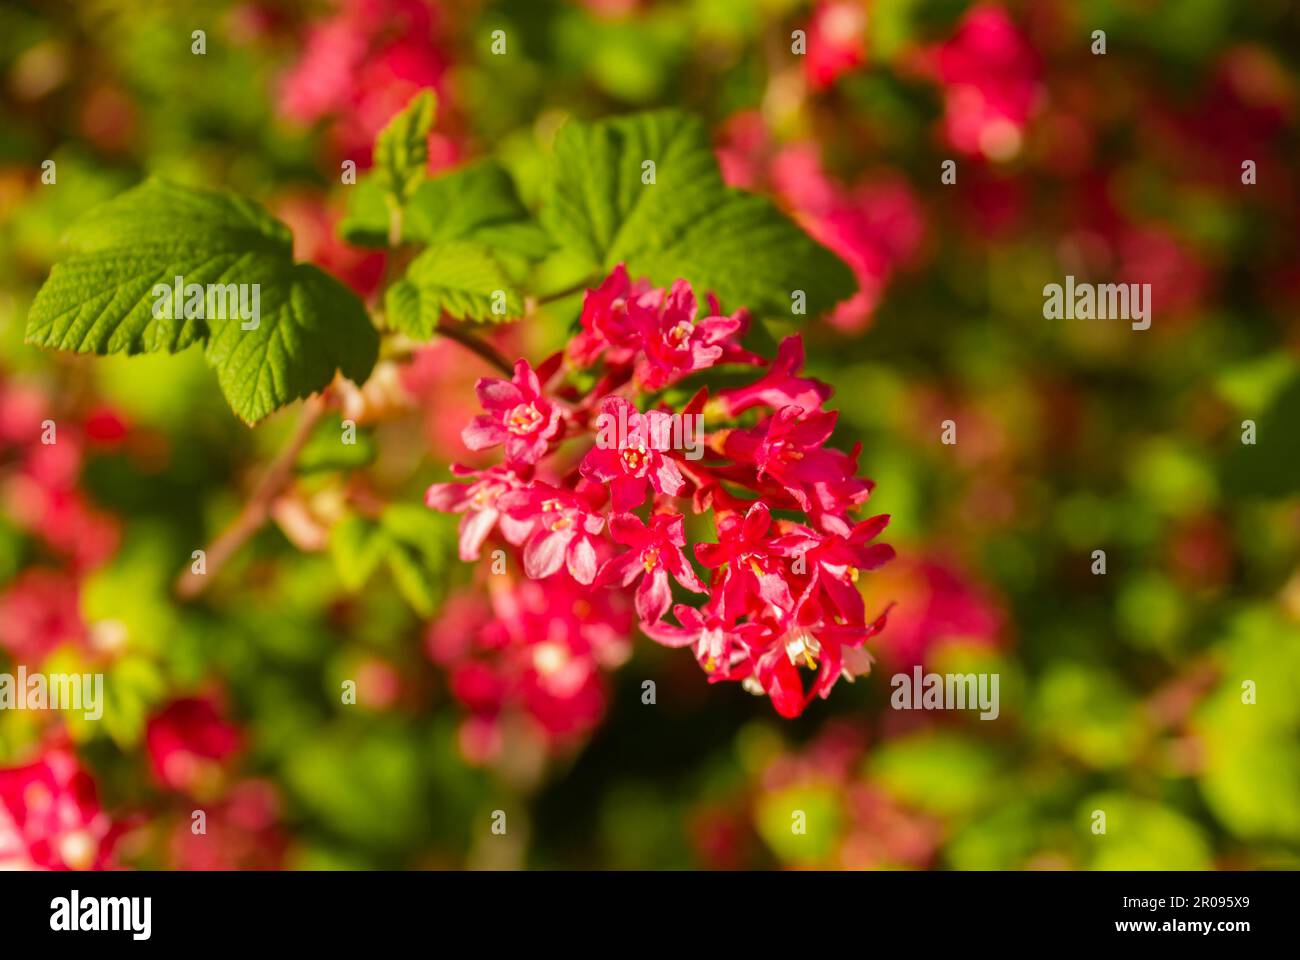 Close-up image of flowering Red Currant flowers in full bloom, bushy deciduous Ribes sanguineum 'Pulborough Scarlet' shrub in spring garden with pink Stock Photo